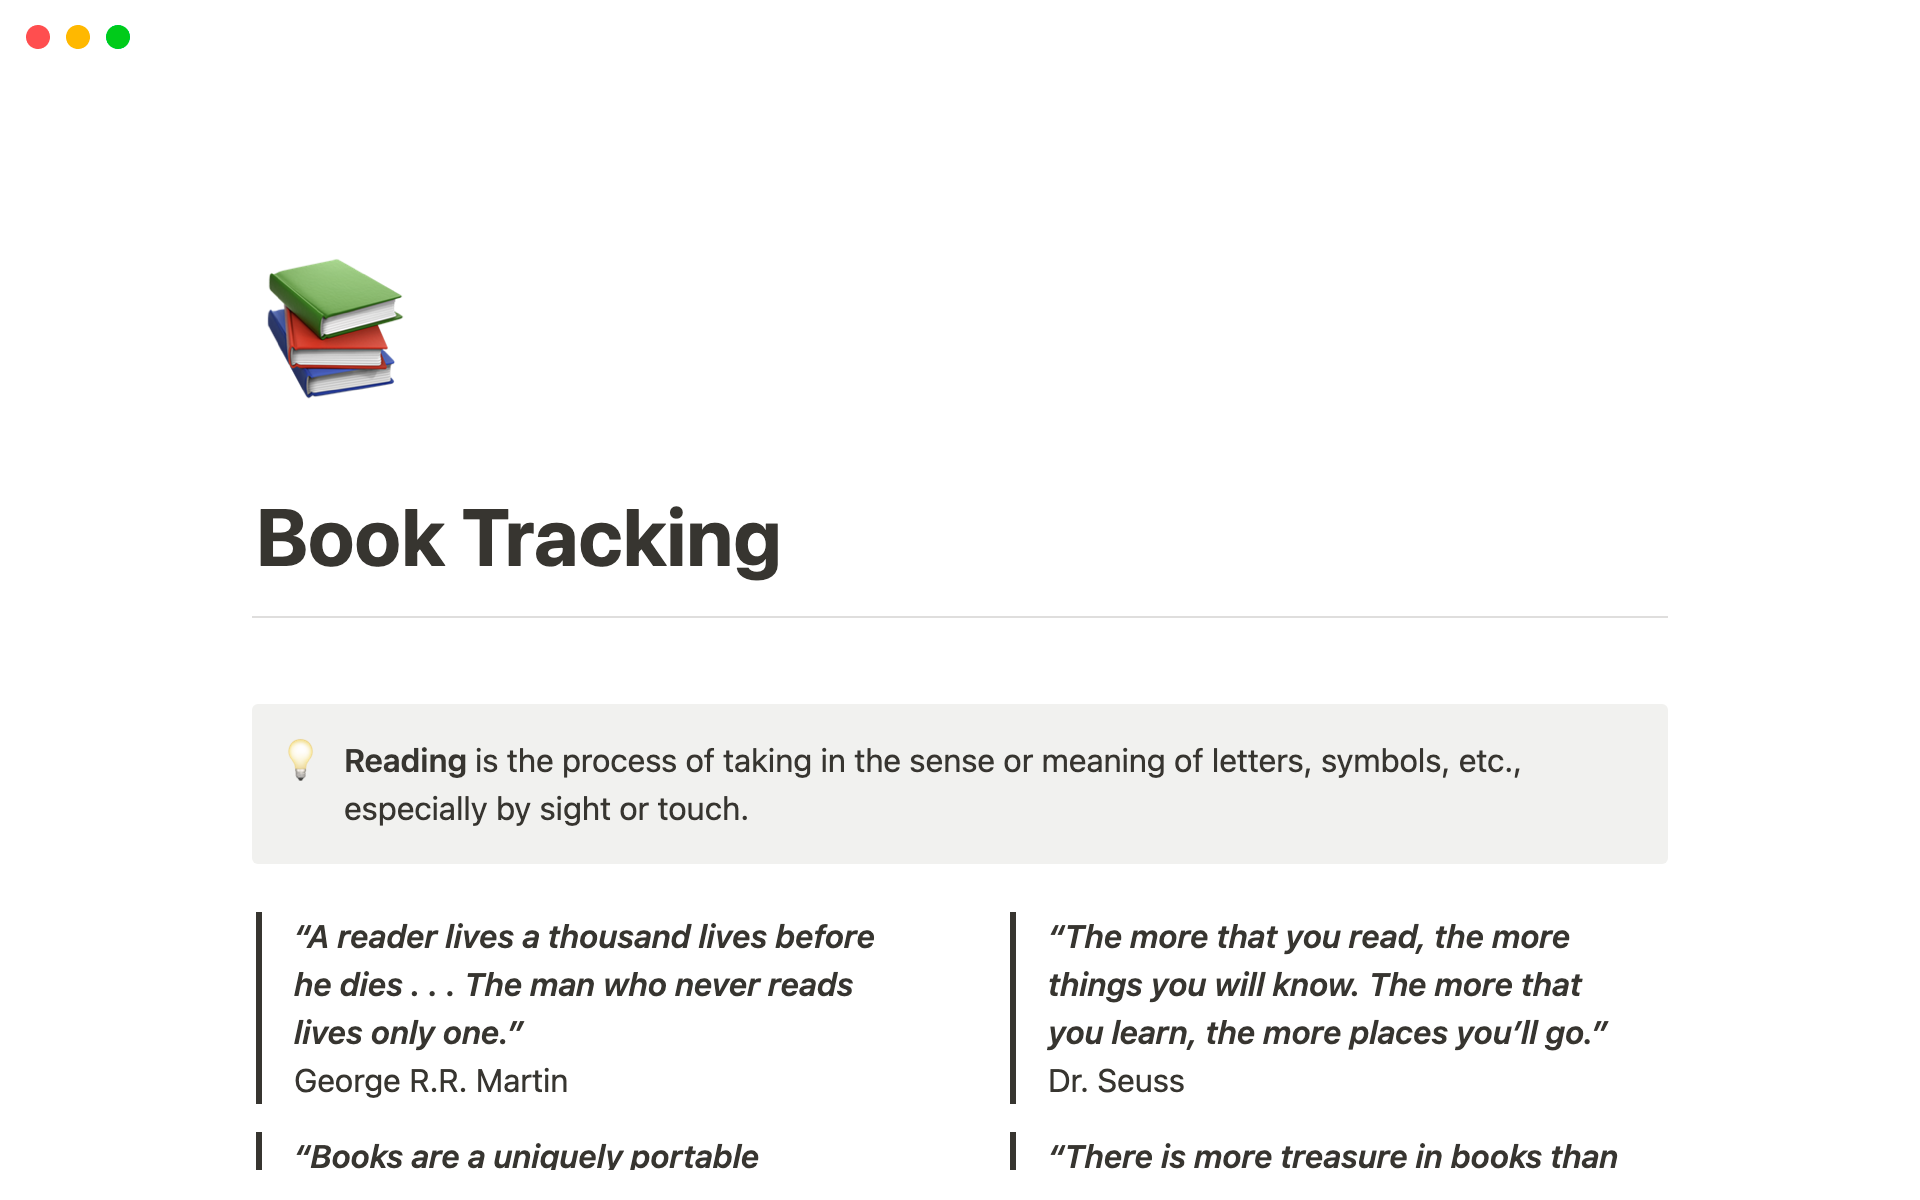 Our template is the perfect solution for all your book tracking needs.